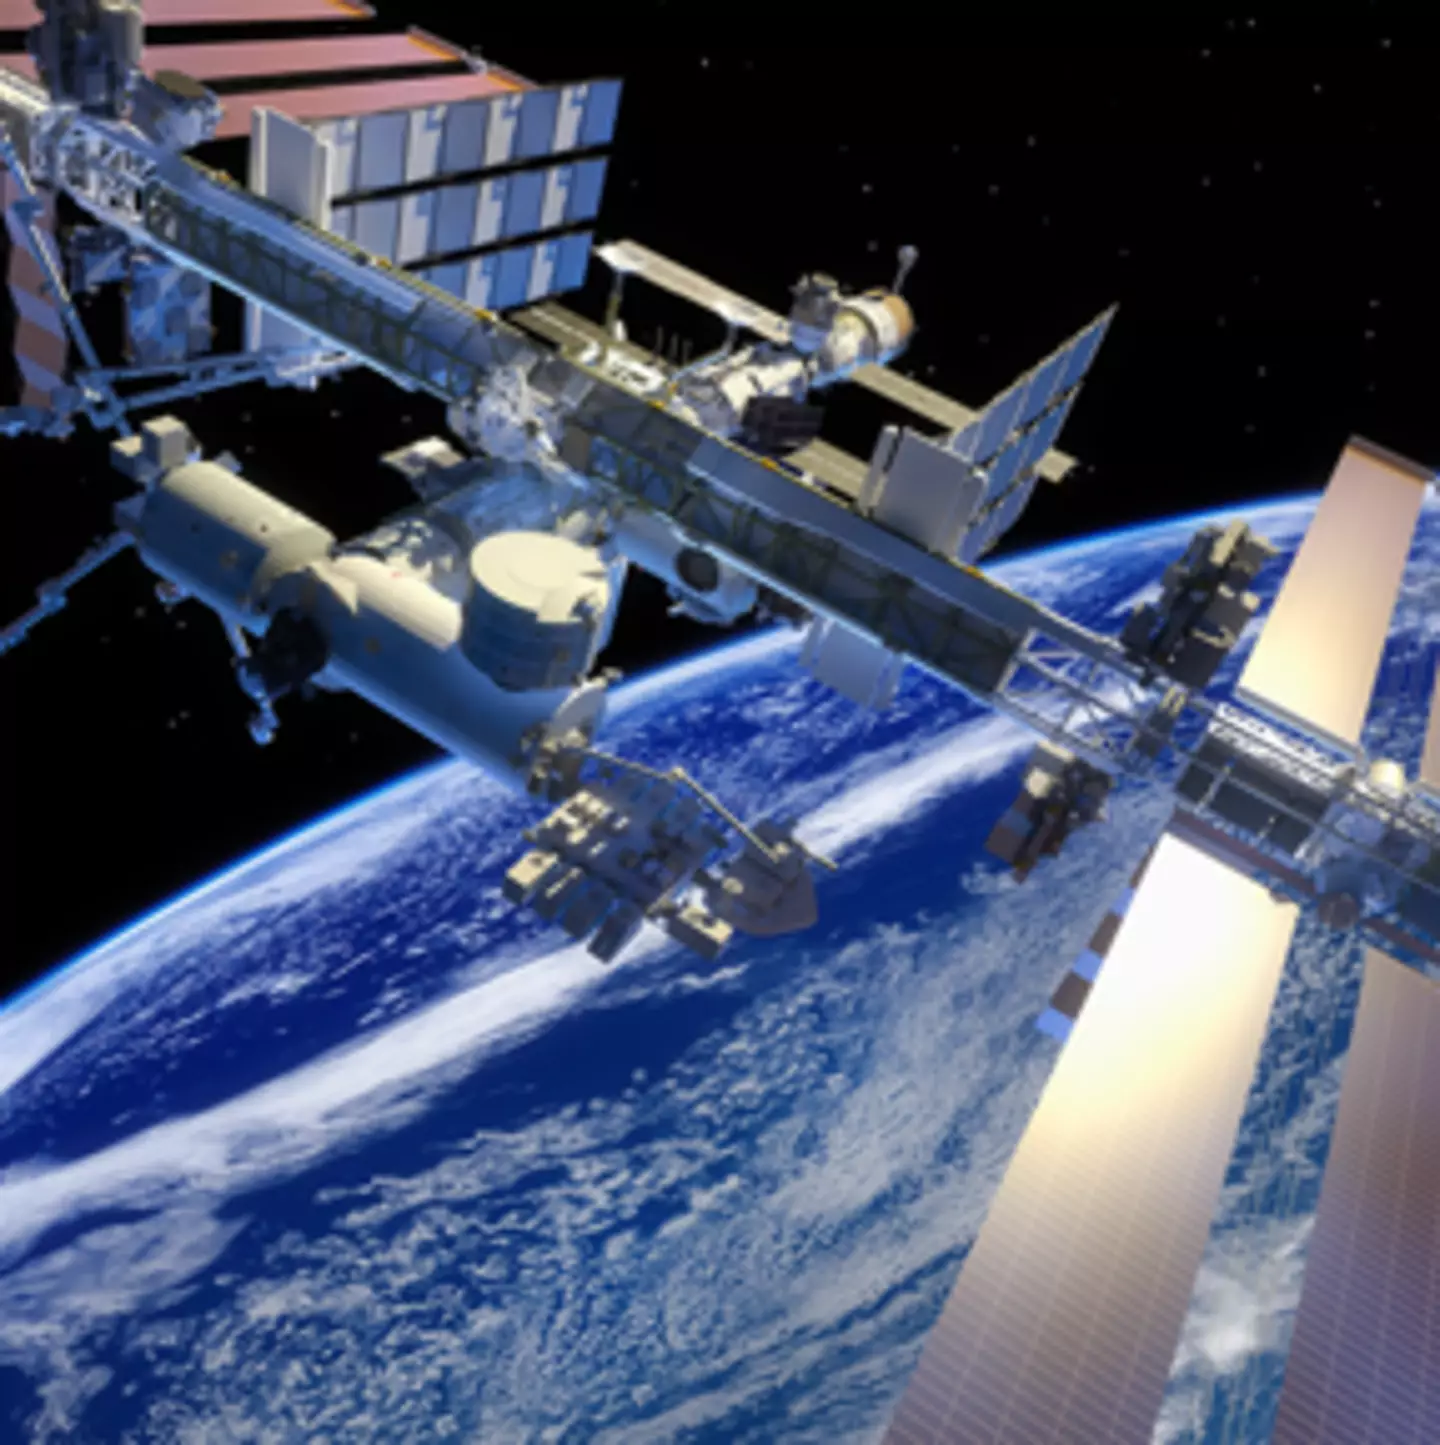 Starlink claims it will provide high-speed internet to world’s first private space station